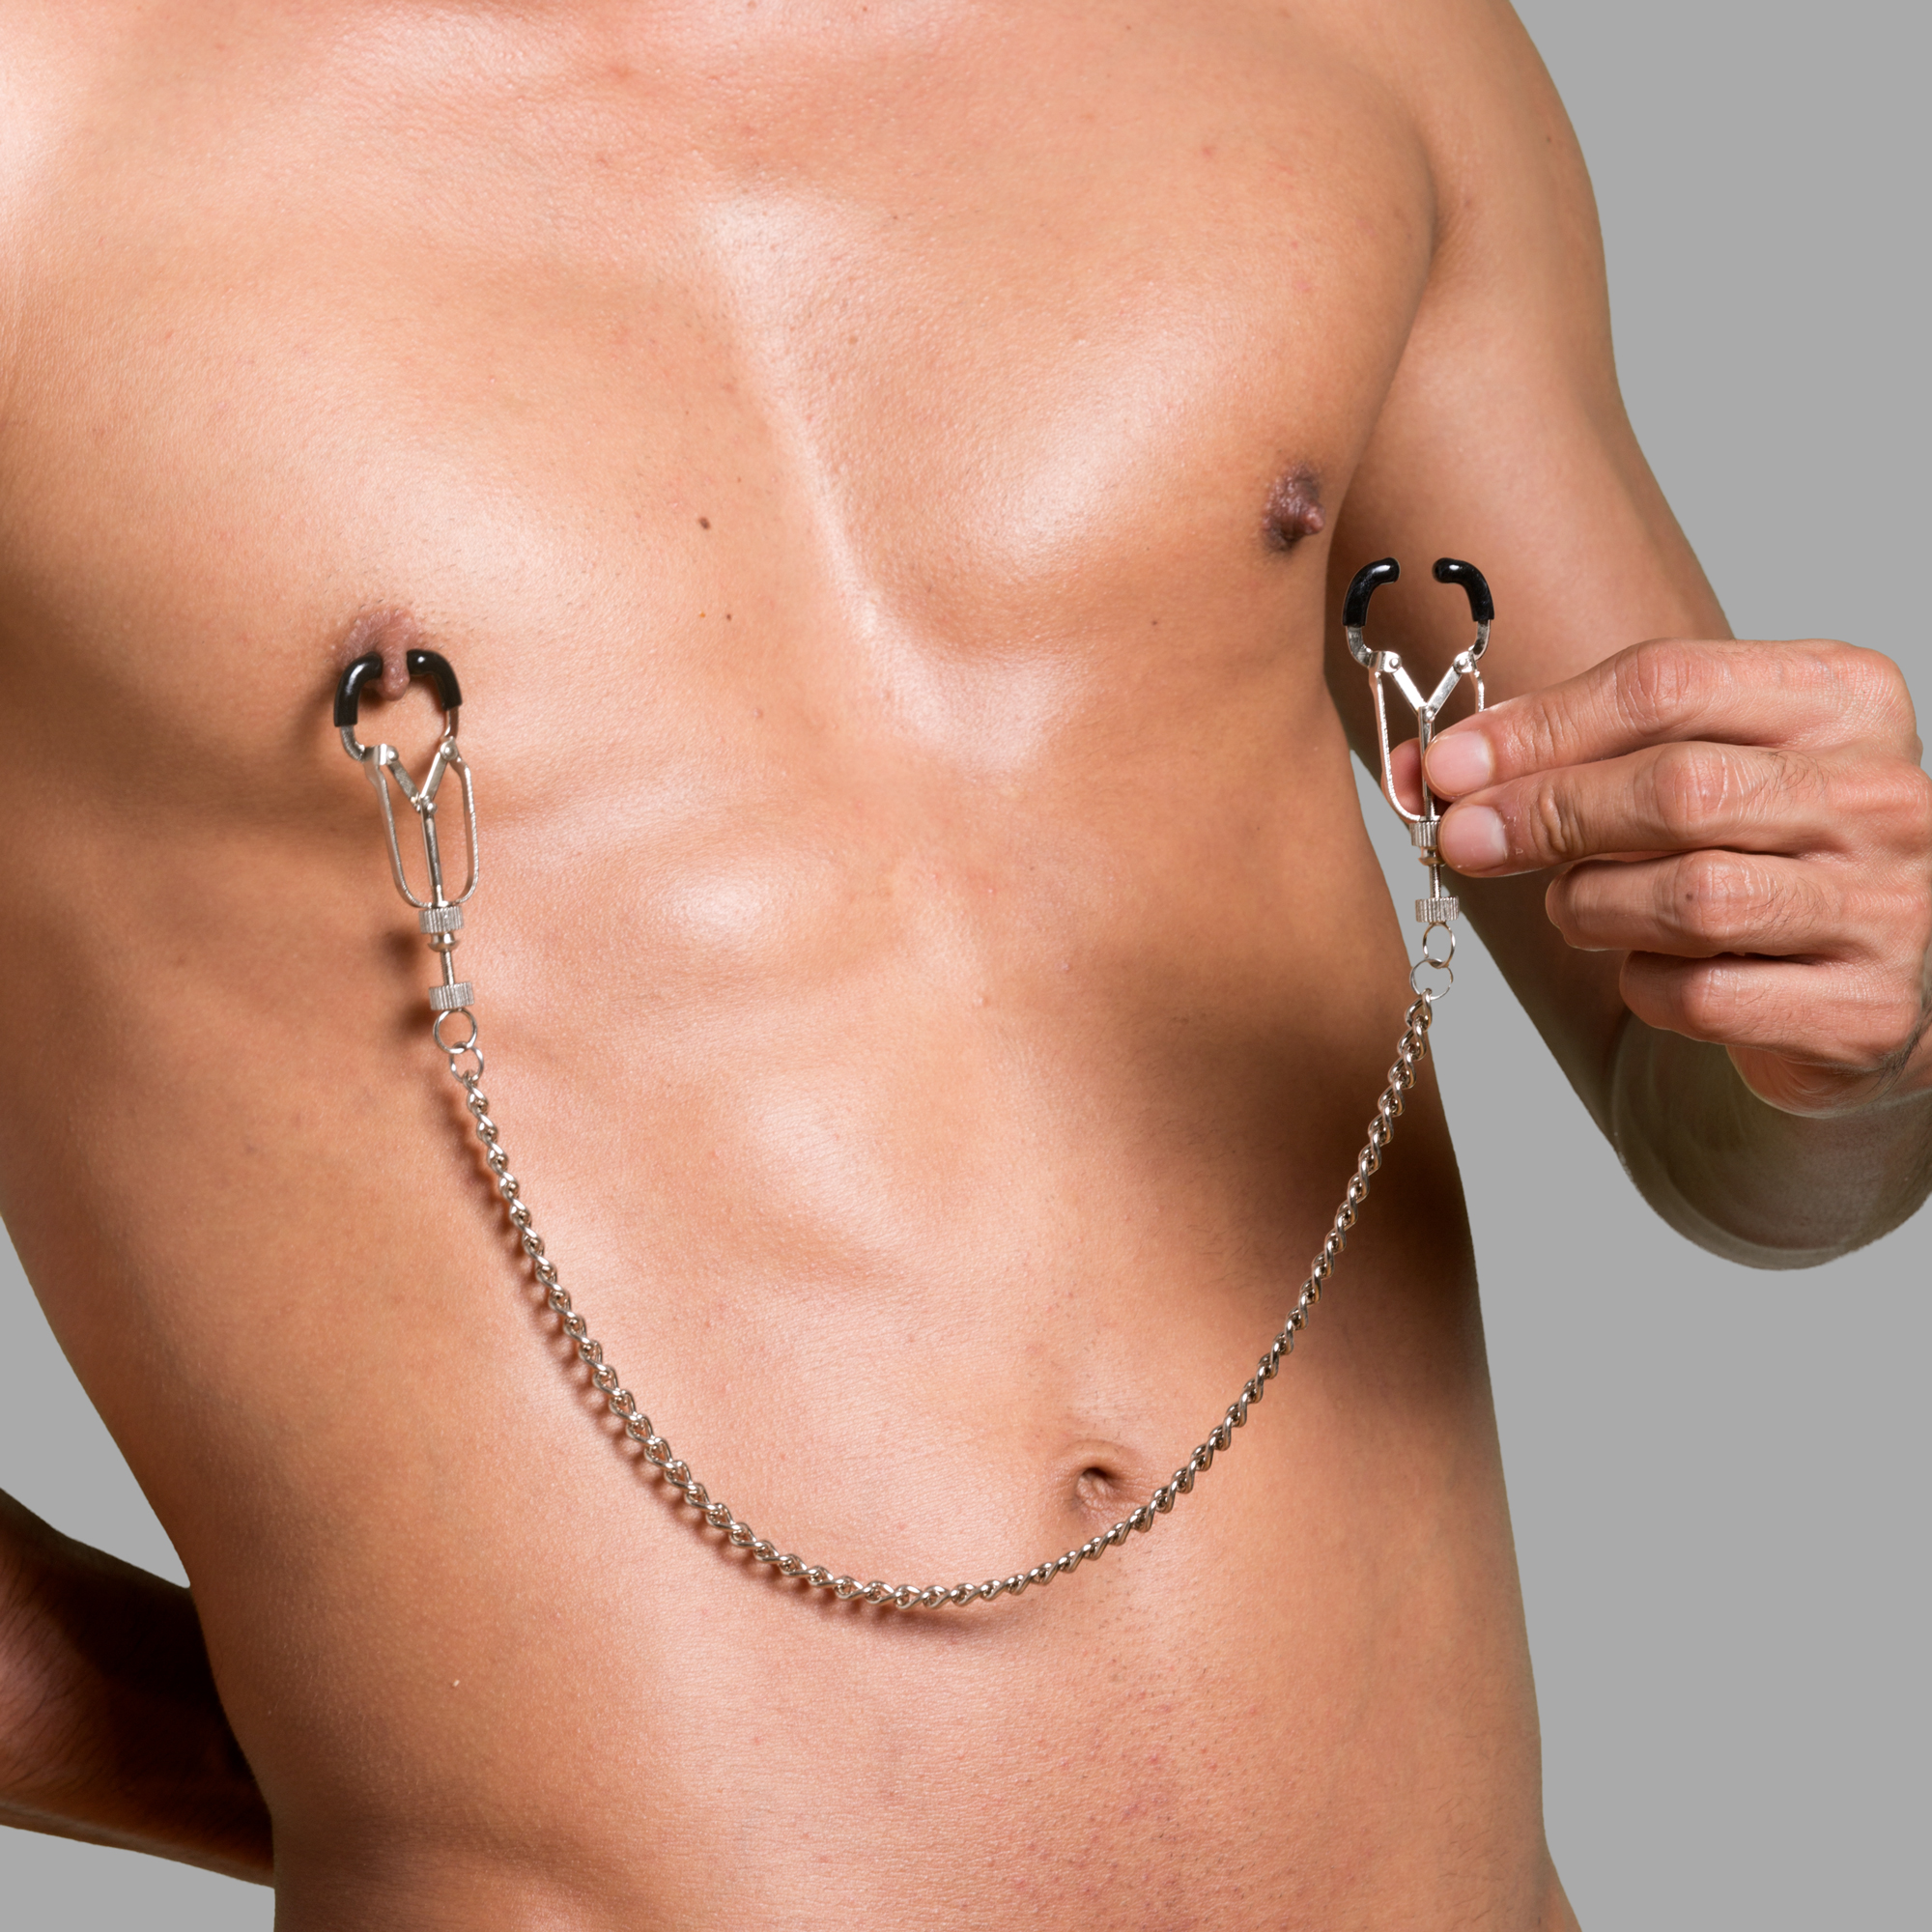 Male nipple clamps picture